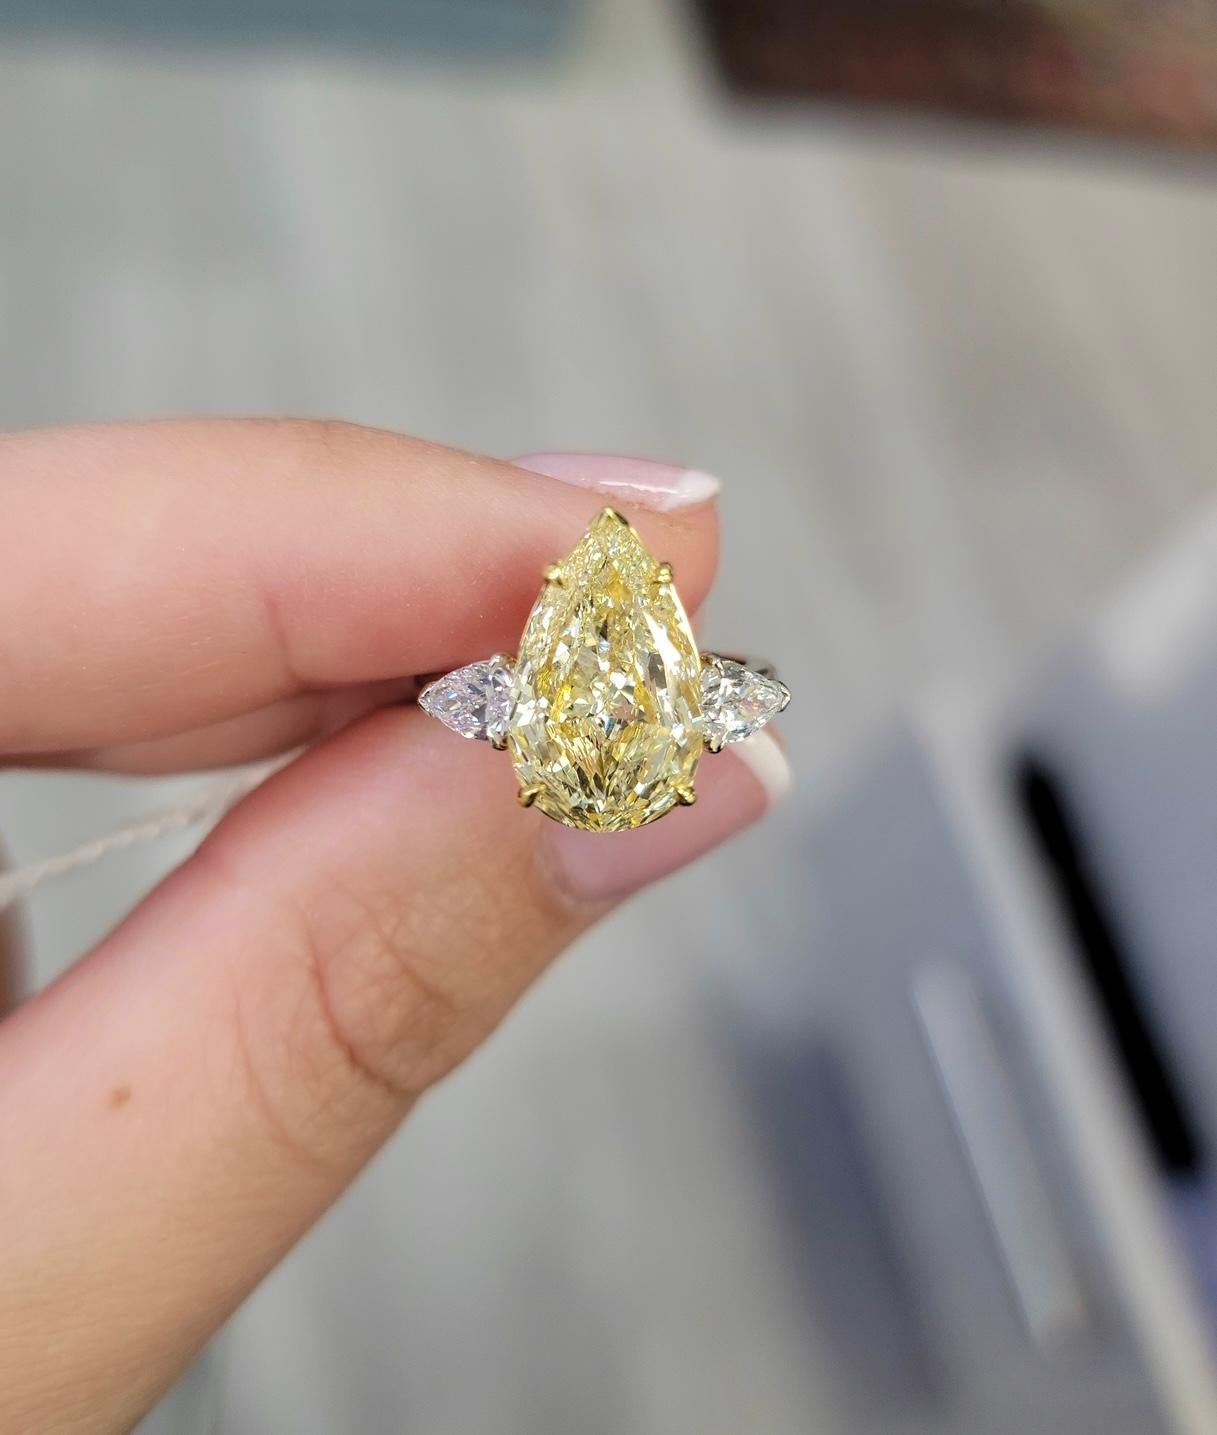 Sensational ring with a very spreads pear shape (47% depth!) full of life and sparkle set in a platinum and 18kt Yellow Gold three stone ring with half carat total weight colorless pear shapes
No bow tie
Very powerful ring
GIA certified U-V color